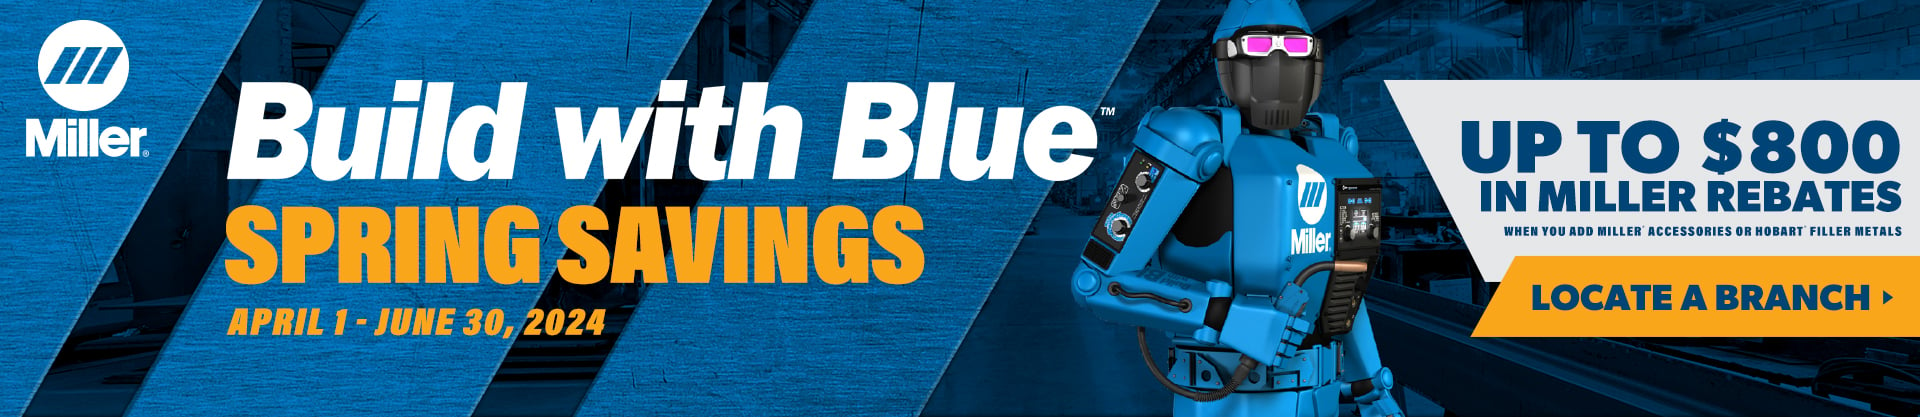 Miller Build with Blue Spring Savings Promotion!